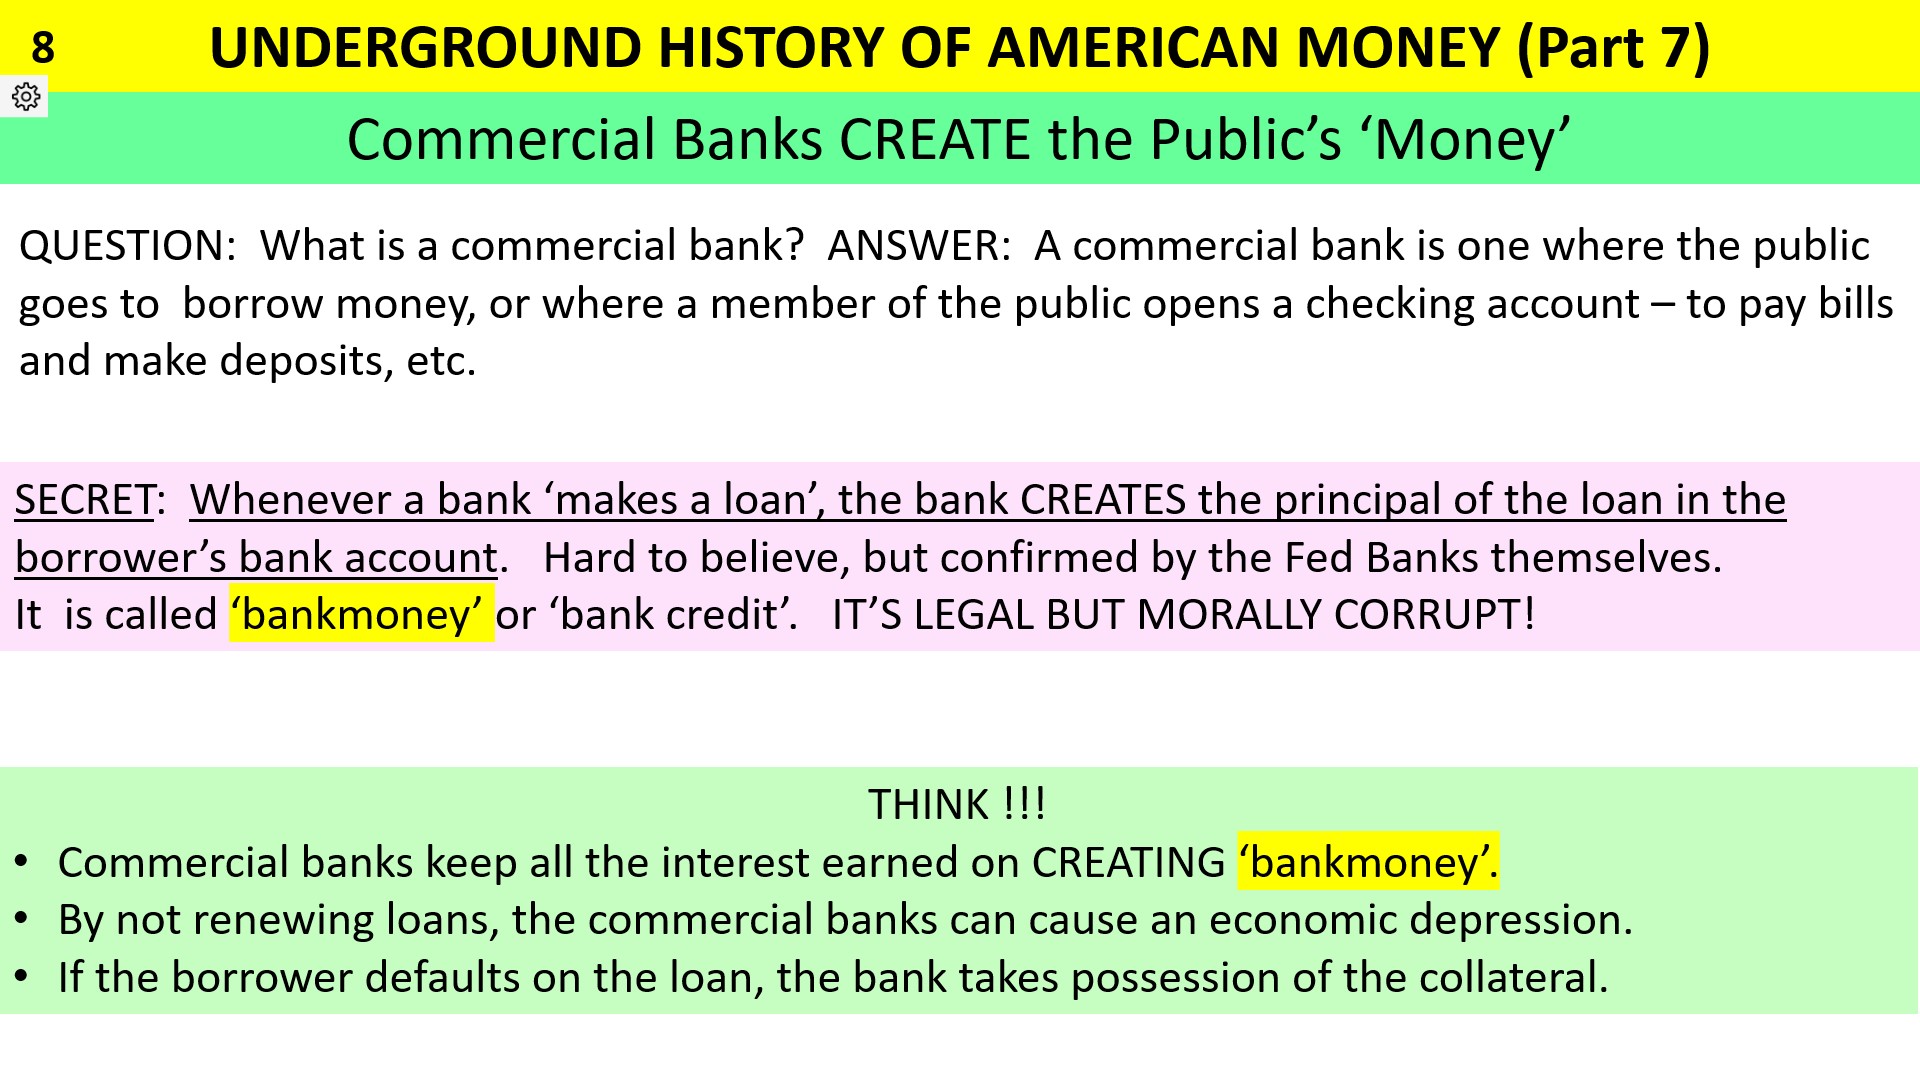 Commercial banks create deposits, used as money, when they make loans.